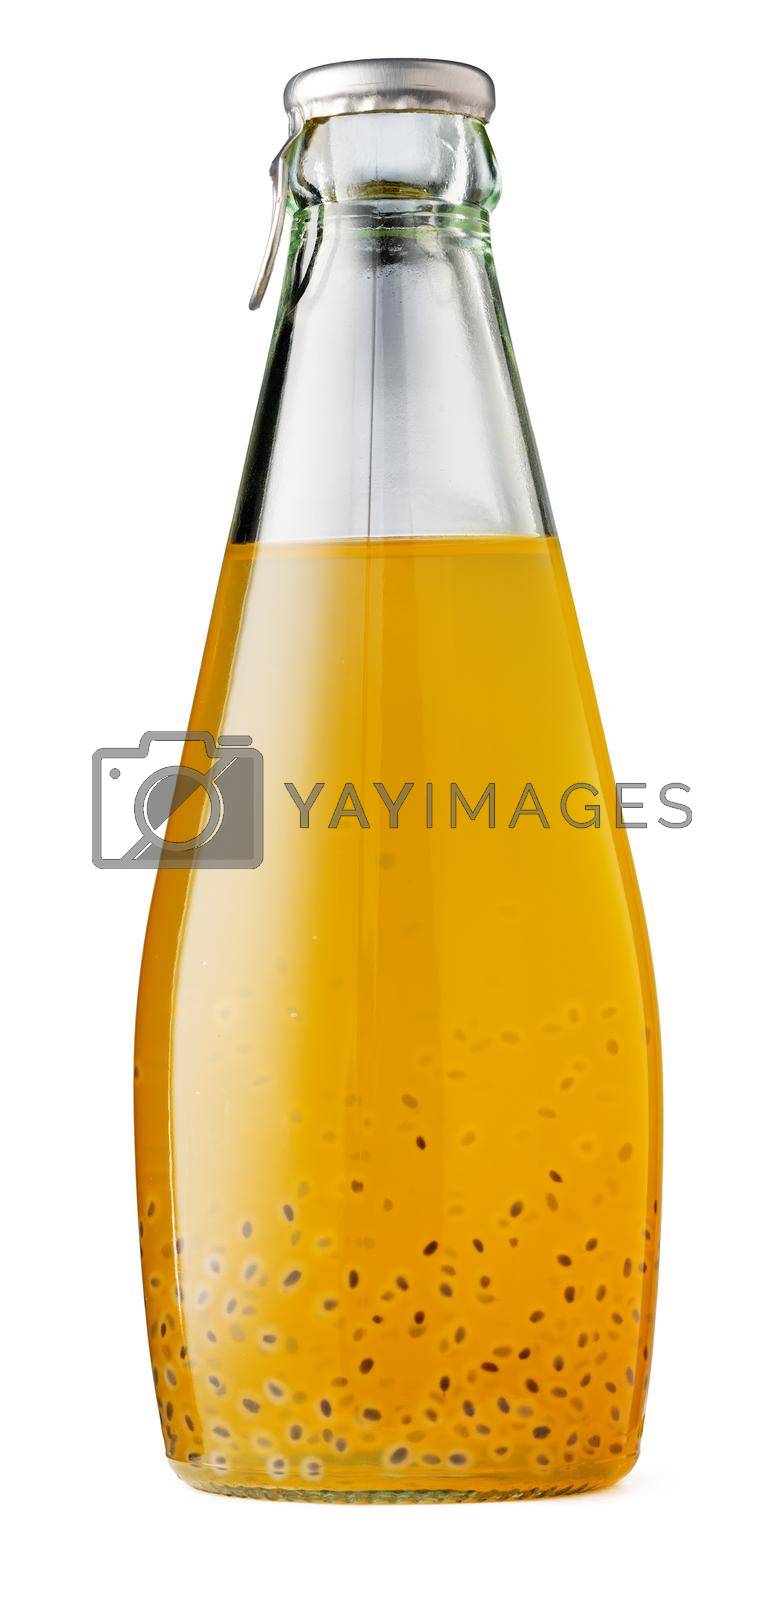 Drink with basil seeds in a glass bottle isolated on white background